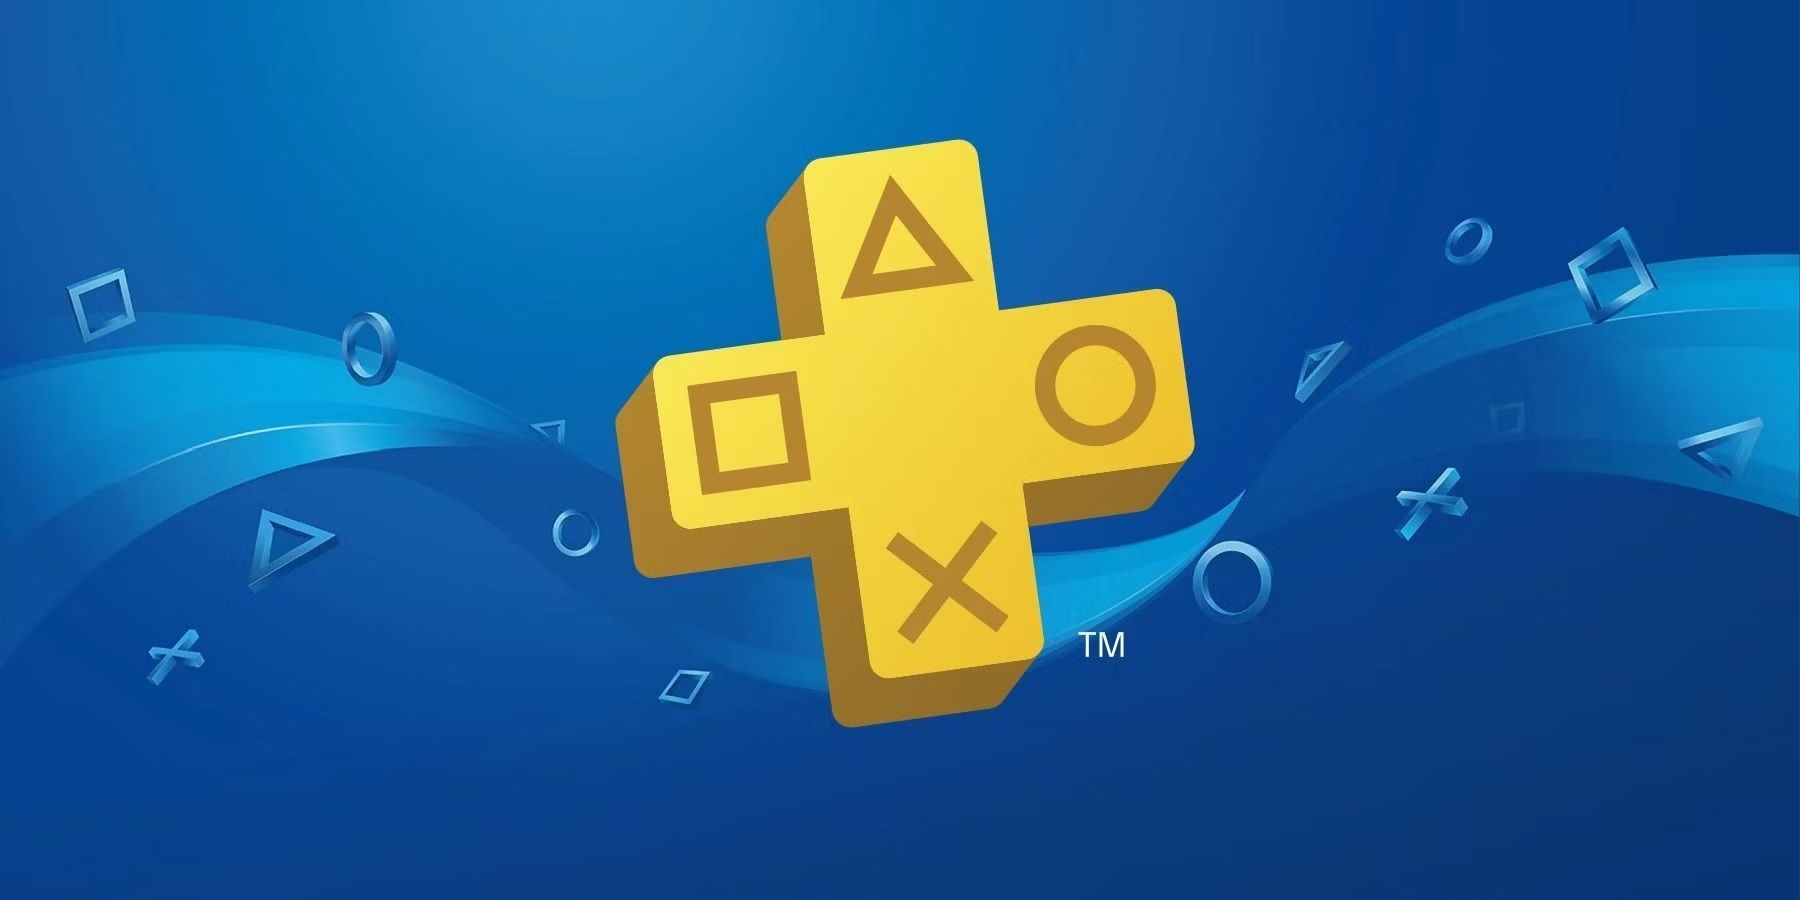 ps plus logo with blue background